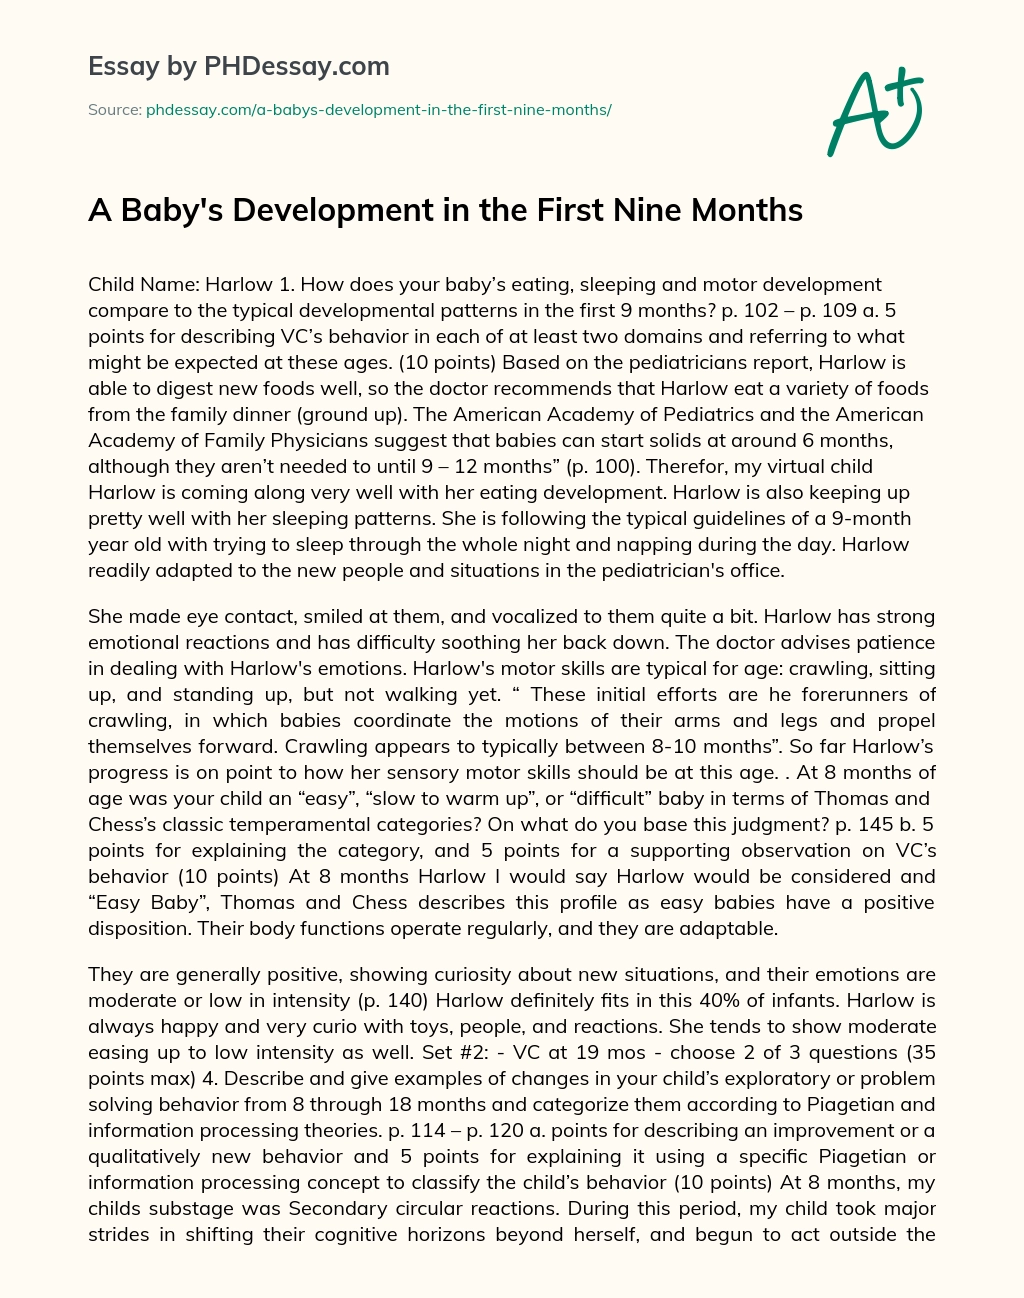 A Baby’s Development in the First Nine Months essay